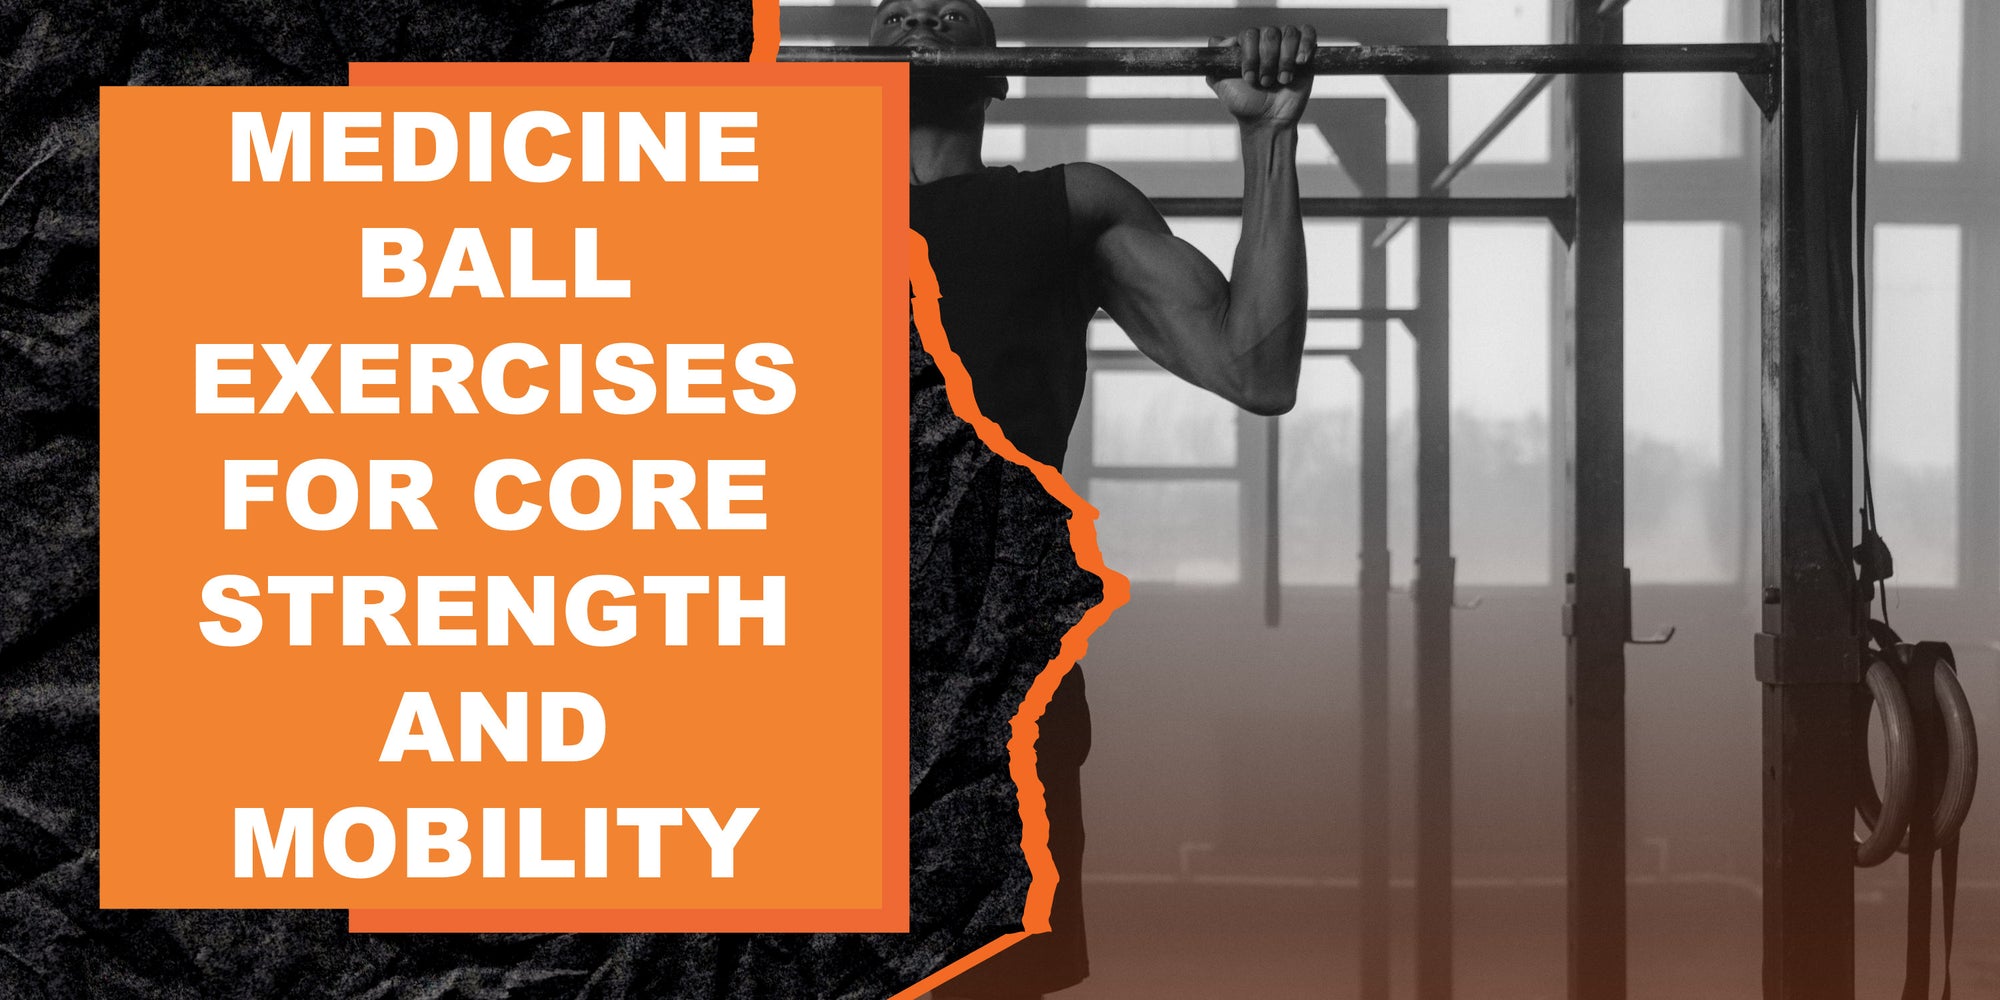 Medicine Ball Exercises for Core Strength and Mobility